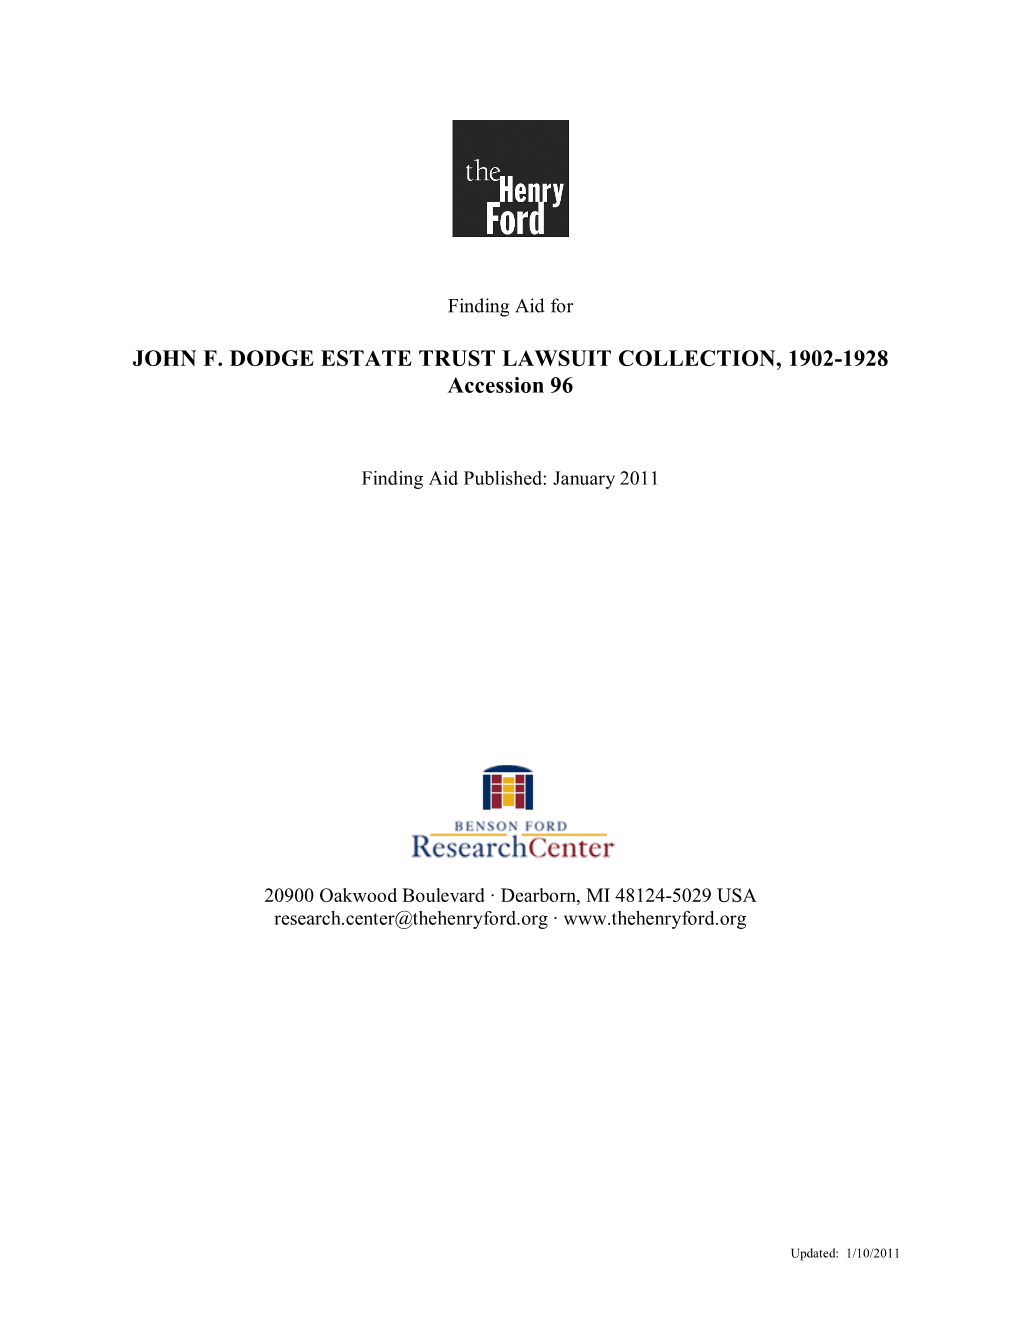 Finding Aid for the John F. Dodge Estate Trust Lawsuit Collection